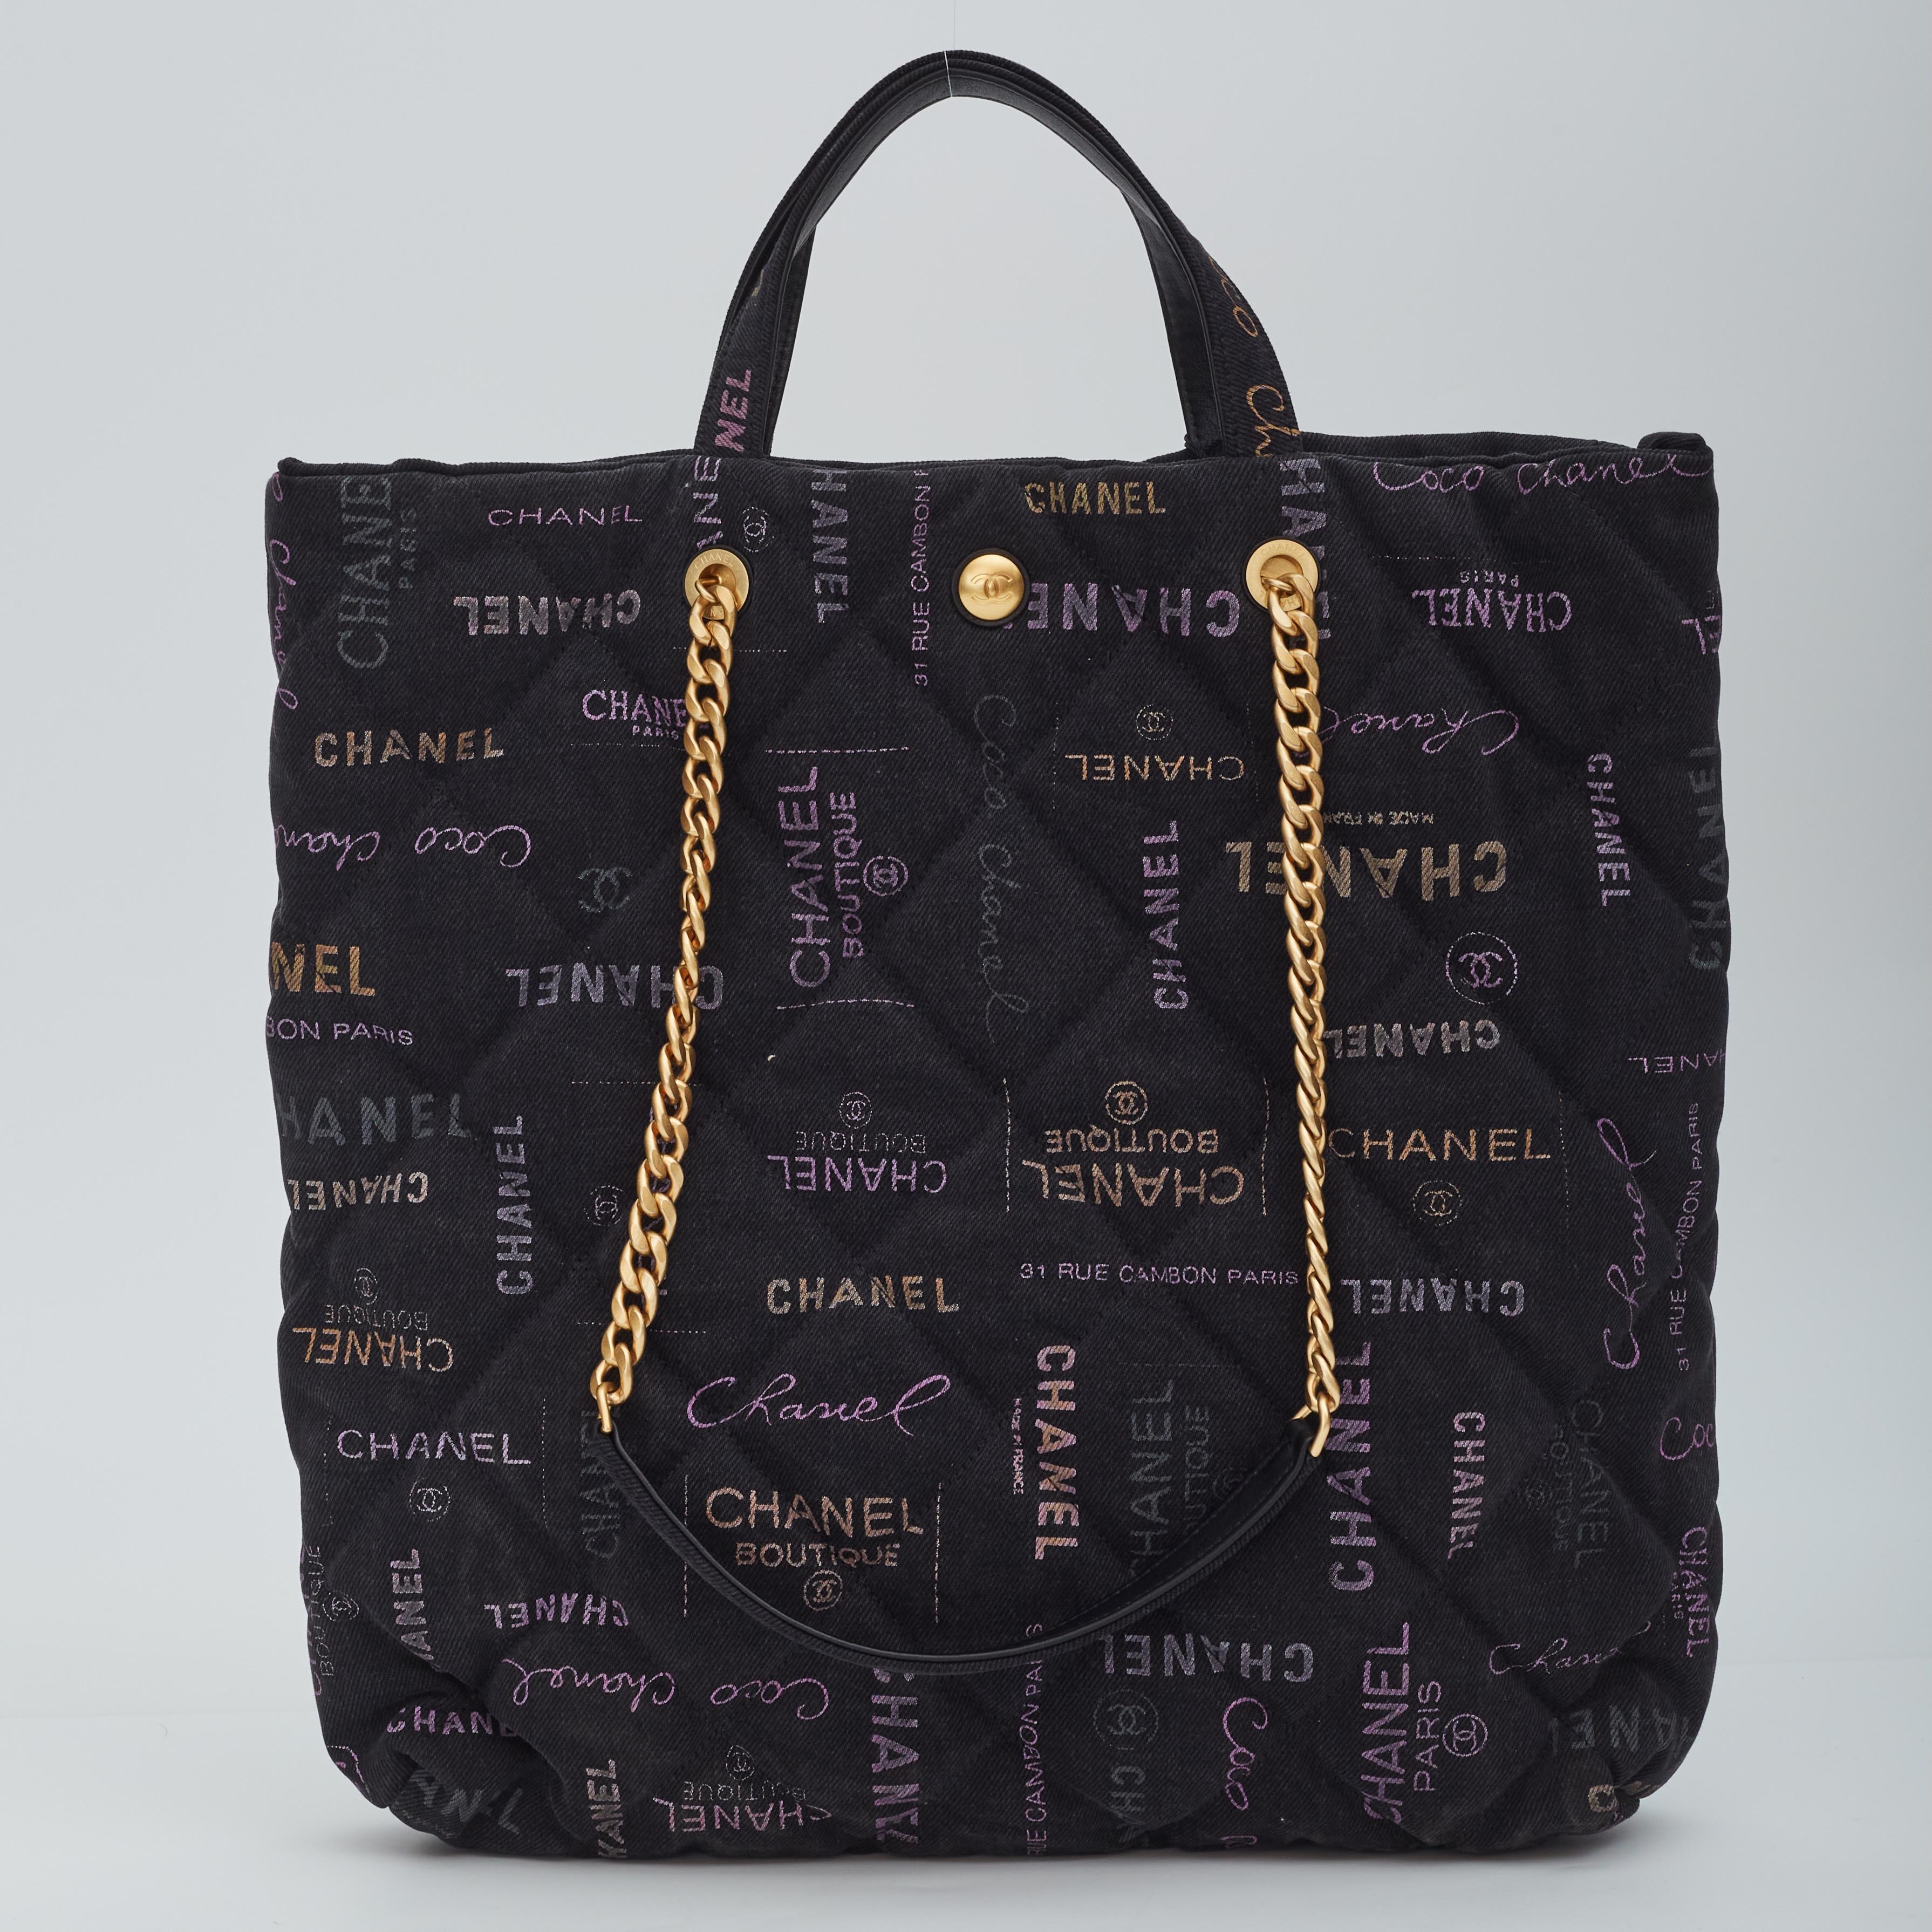 This flap bag is made from black denim. The bag features dual flat leather top handles, chain shoulder strap, gold tone hardware, graffiti CC motifs, CC turn lock closure and a matching fabric interior with a pocket.

Color: Black
Material: